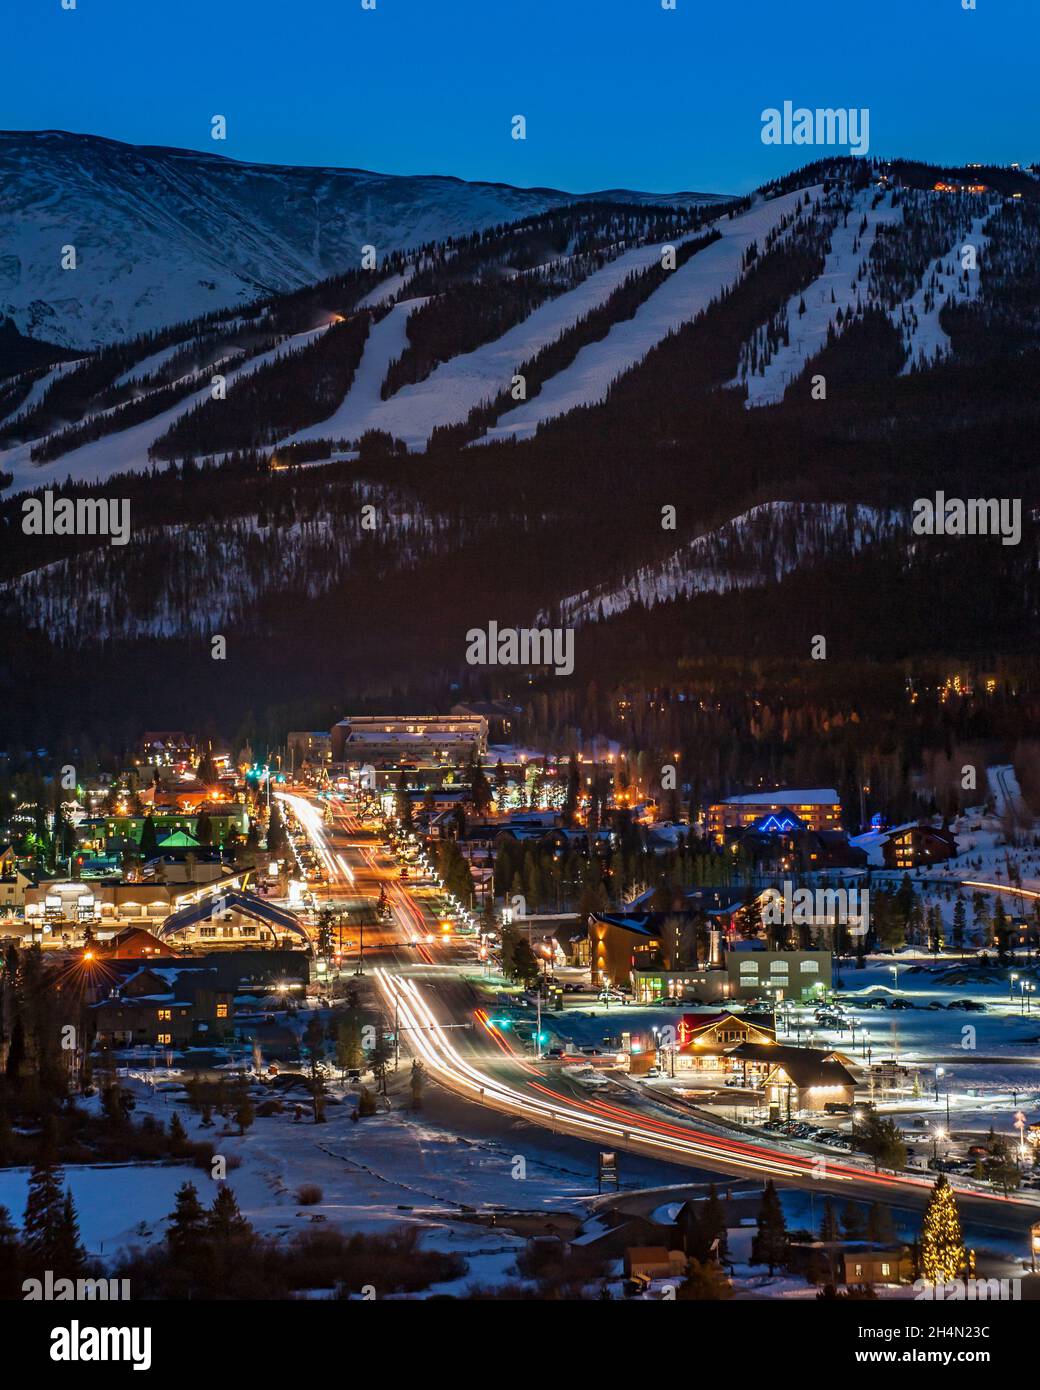 Christmas lights of the Town of Winter Park, Colorado in front of the Winter Park Ski Resort Stock Photo